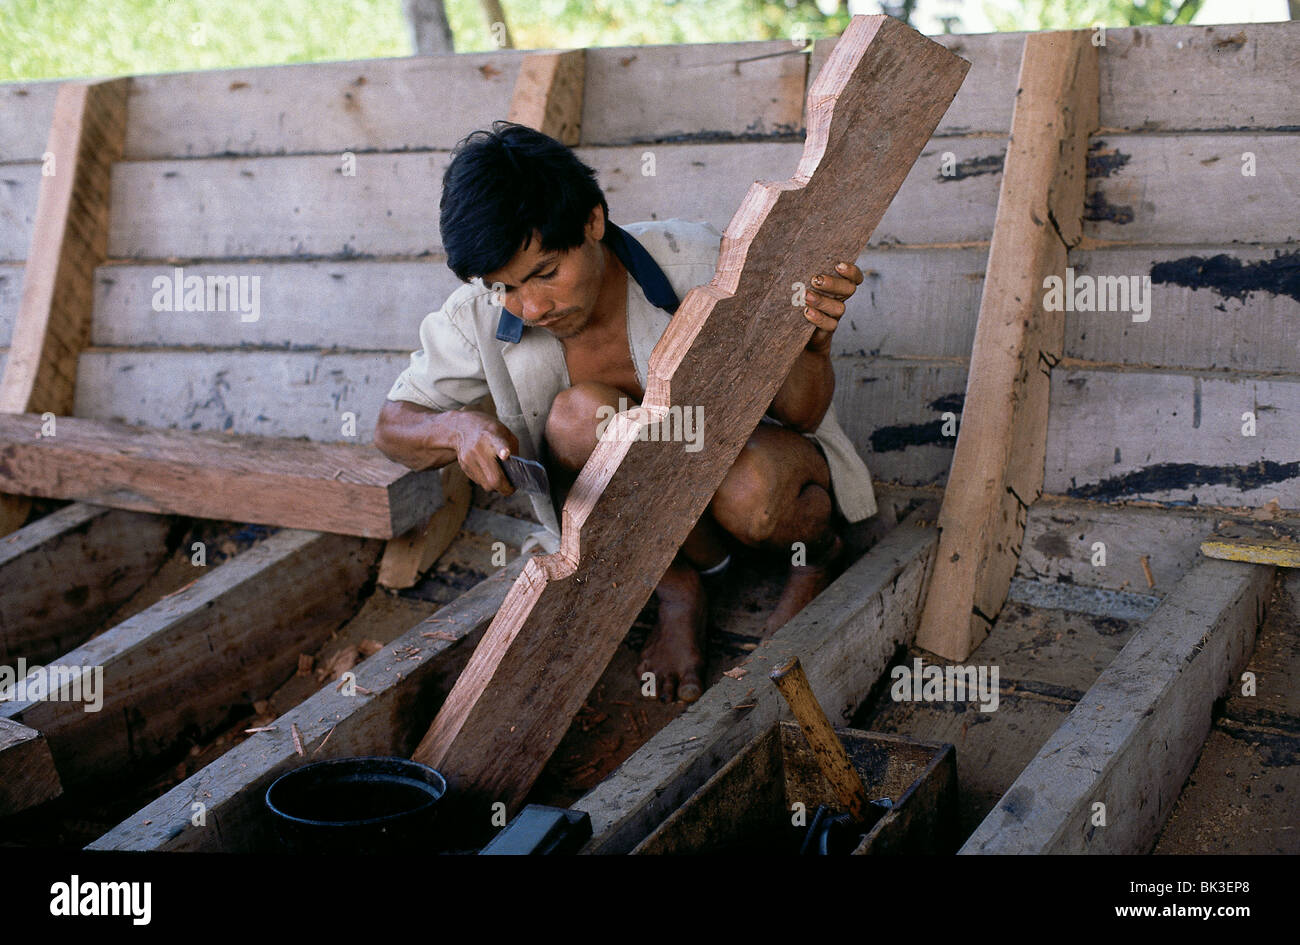 Wood worker or boat builder in the Amazon Region of Peru Stock Photo